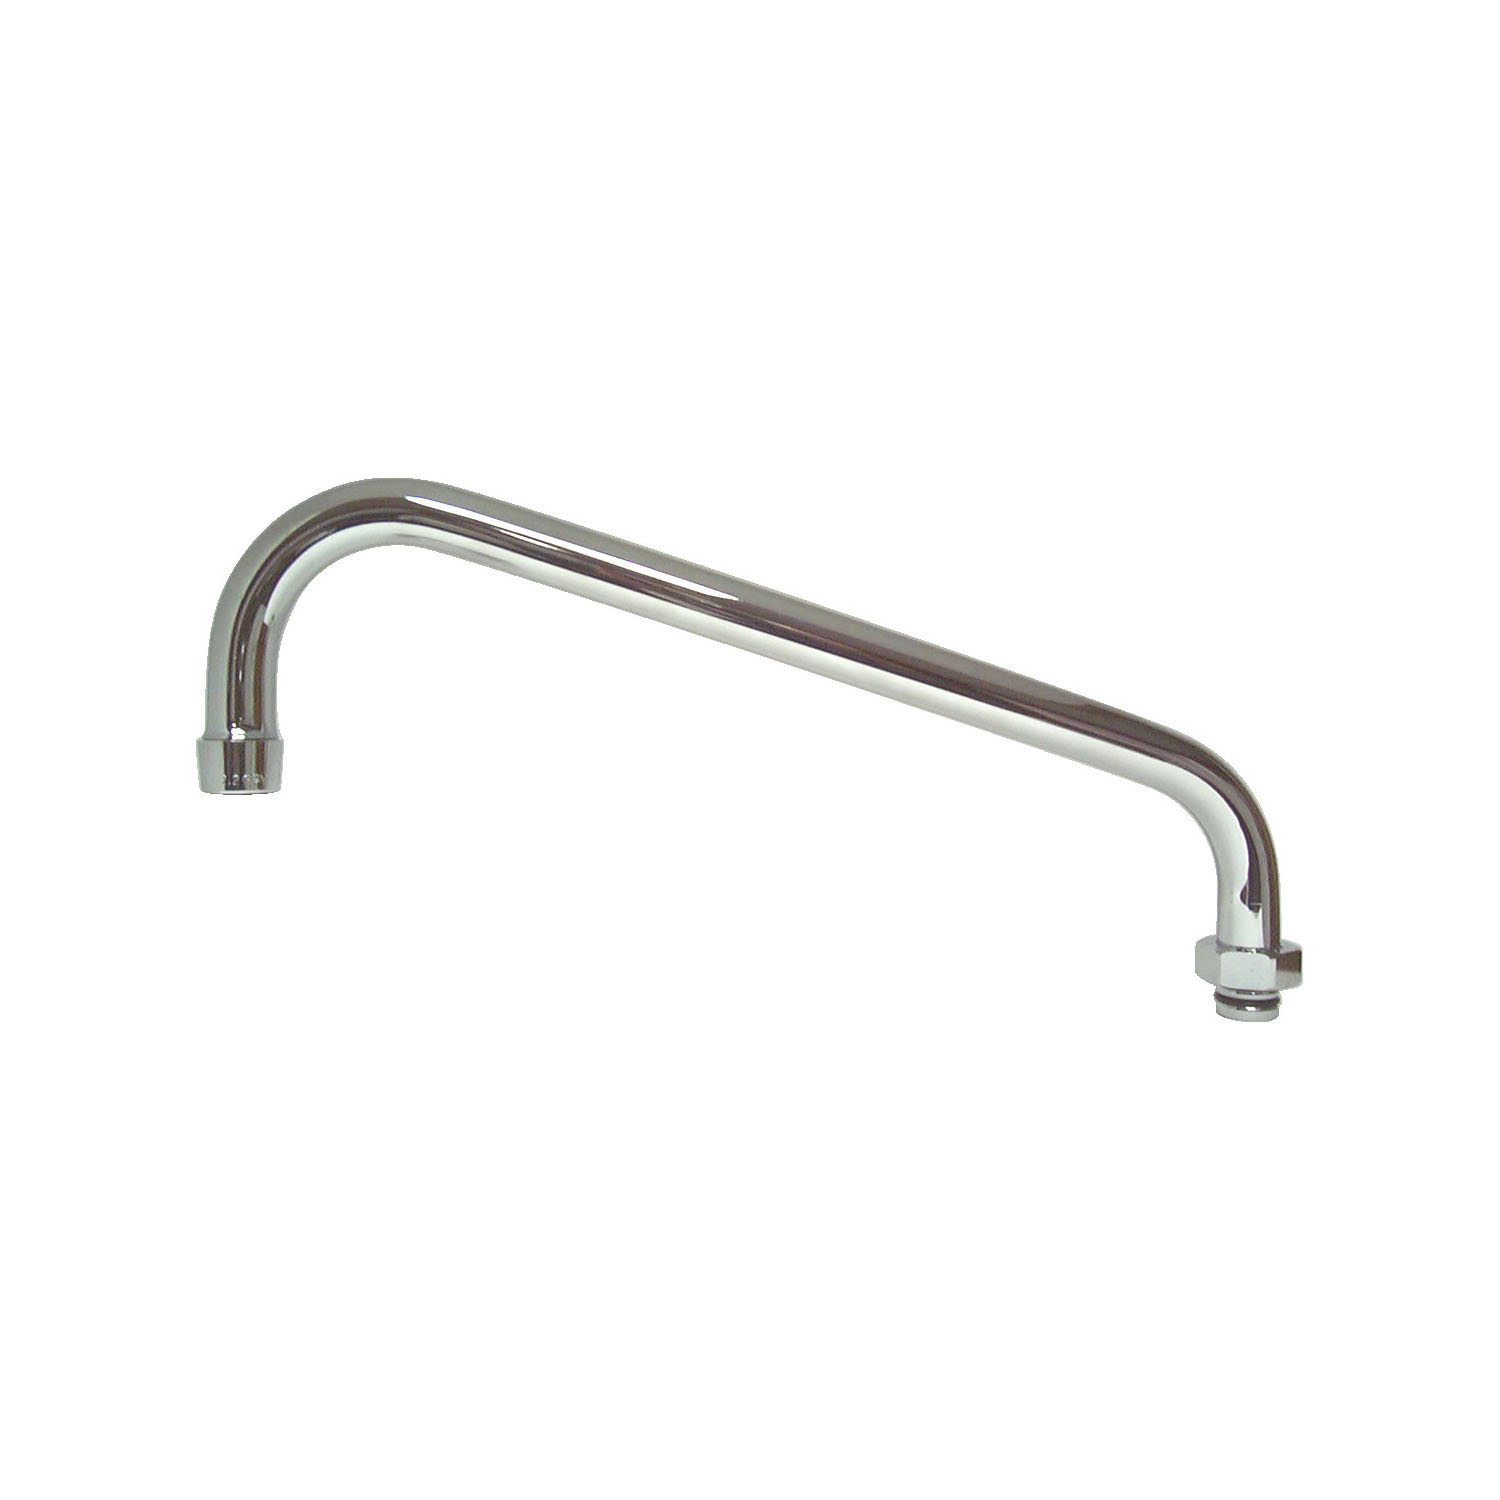 4 Fisher 53740 Stainless Steel Deck Mount Faucet with 6 Swing Spout 